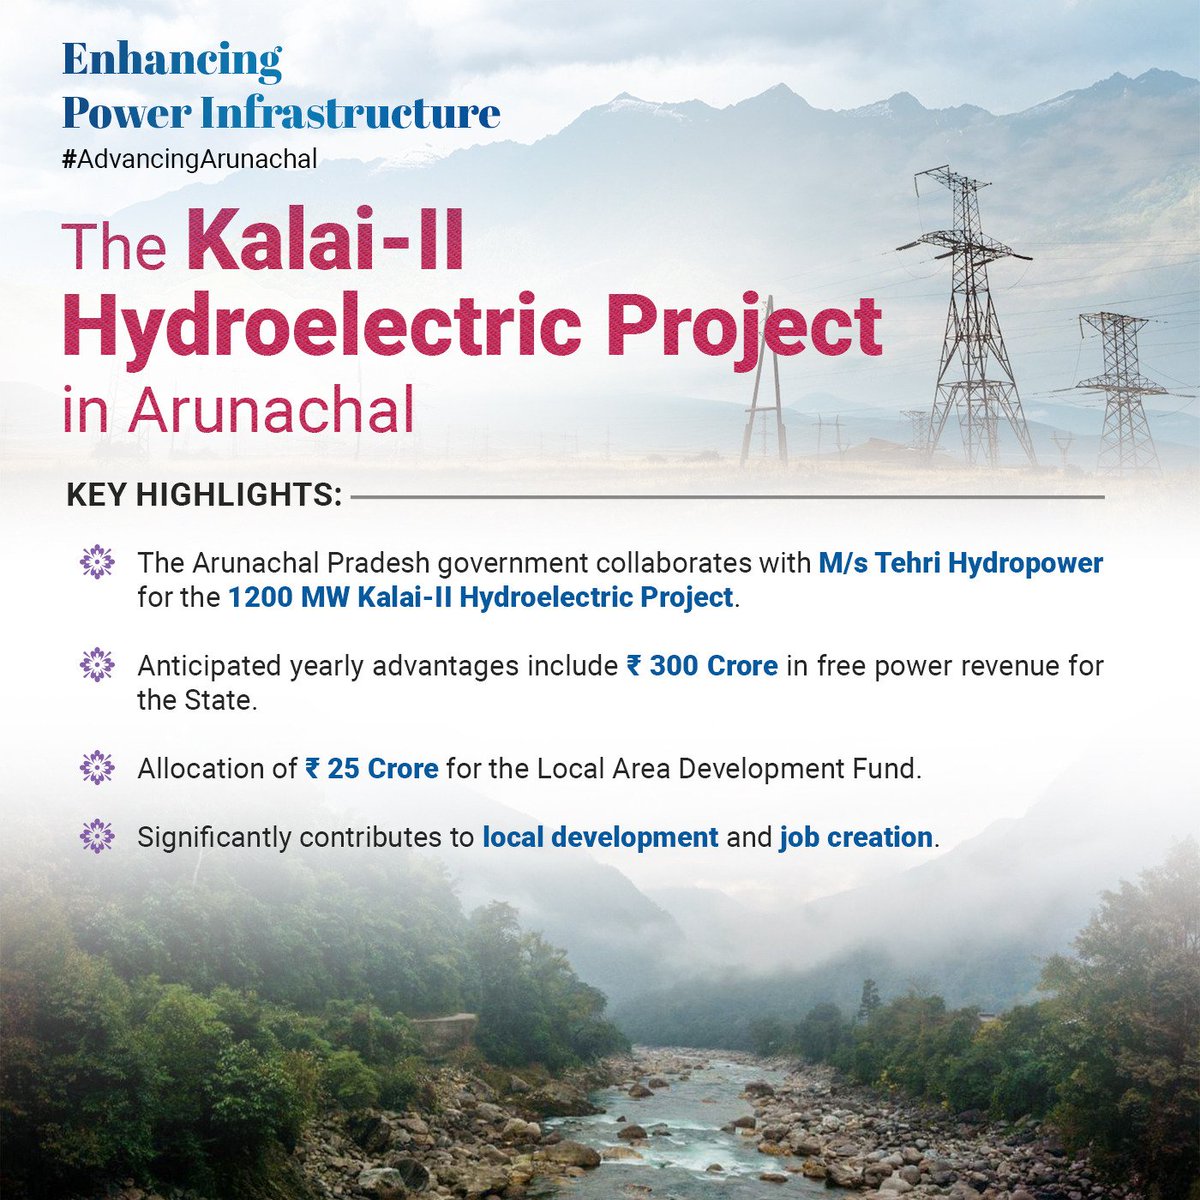 Arunachal's Energy Leap!

Following the joining of forces with three central PSUs (NHPC Ltd, SJVN Ltd, and NEEPCO Ltd) for 12 hydro power projects in Arunachal Pradesh last year, the GoAP signed another agreement with for the ambitious 1200 MW Kalai-II project to gain momentum…